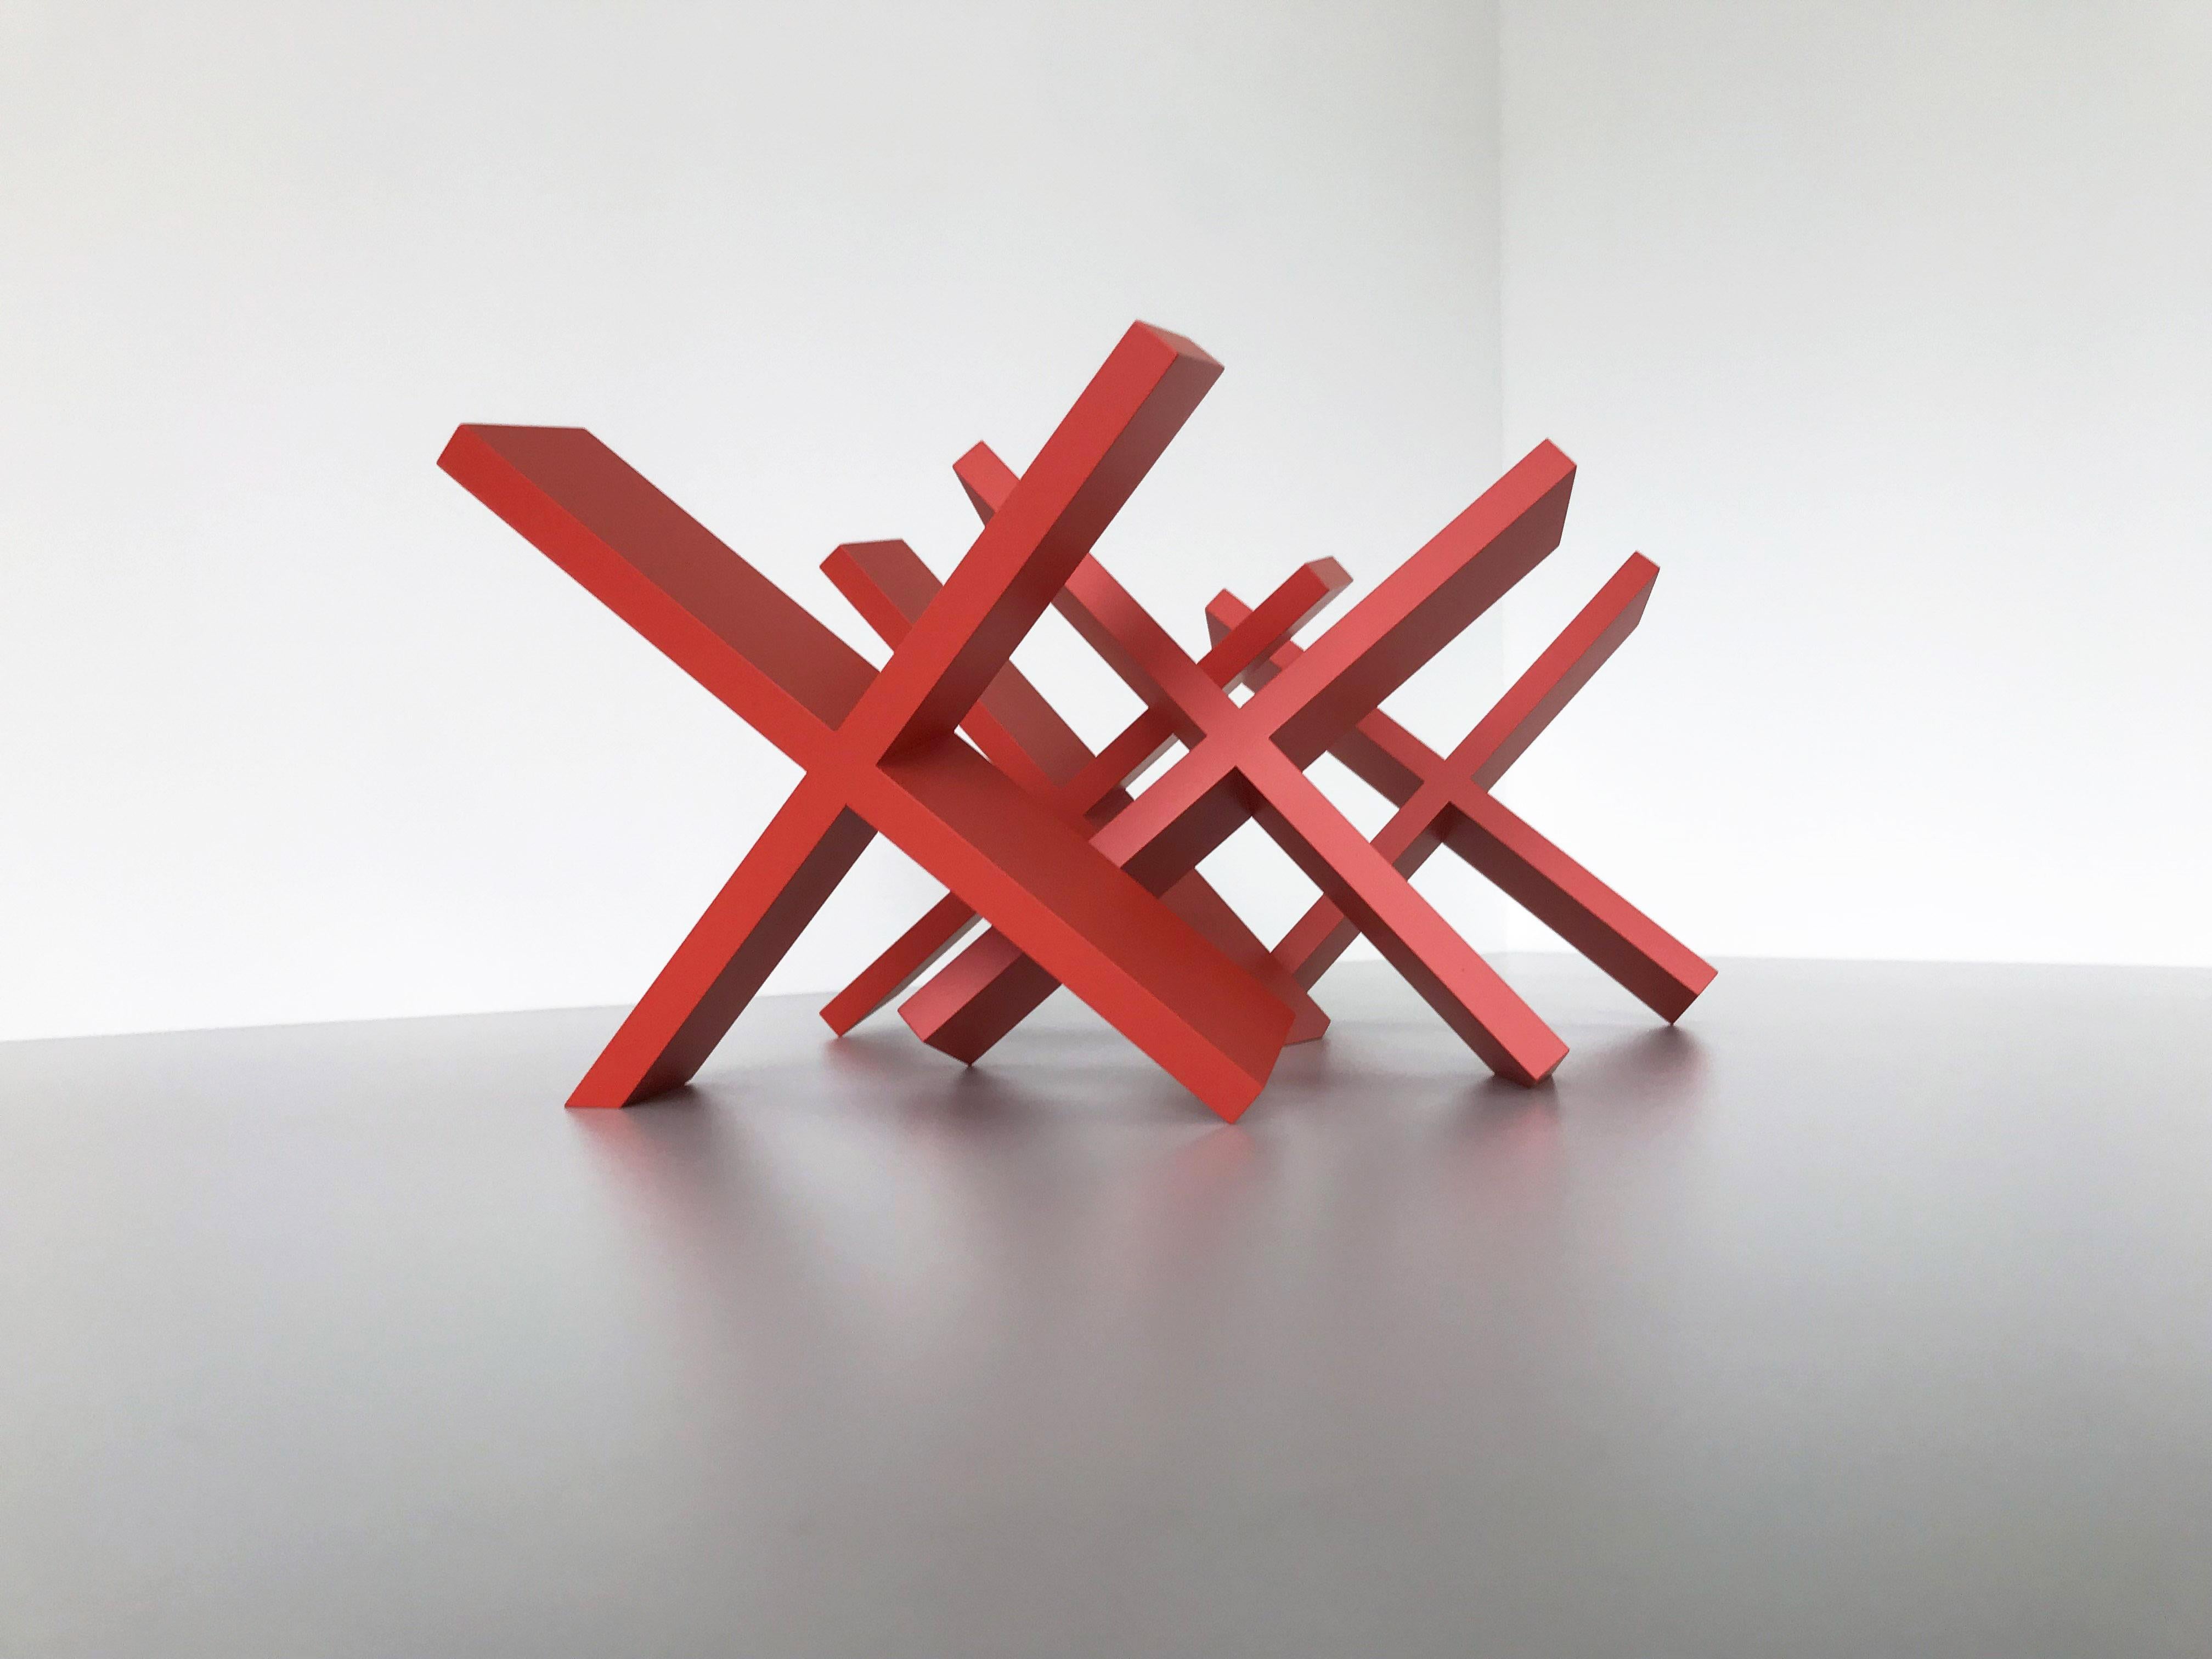 Untitled (4 red X's), Geometrical Abstract Sculpture, 2018